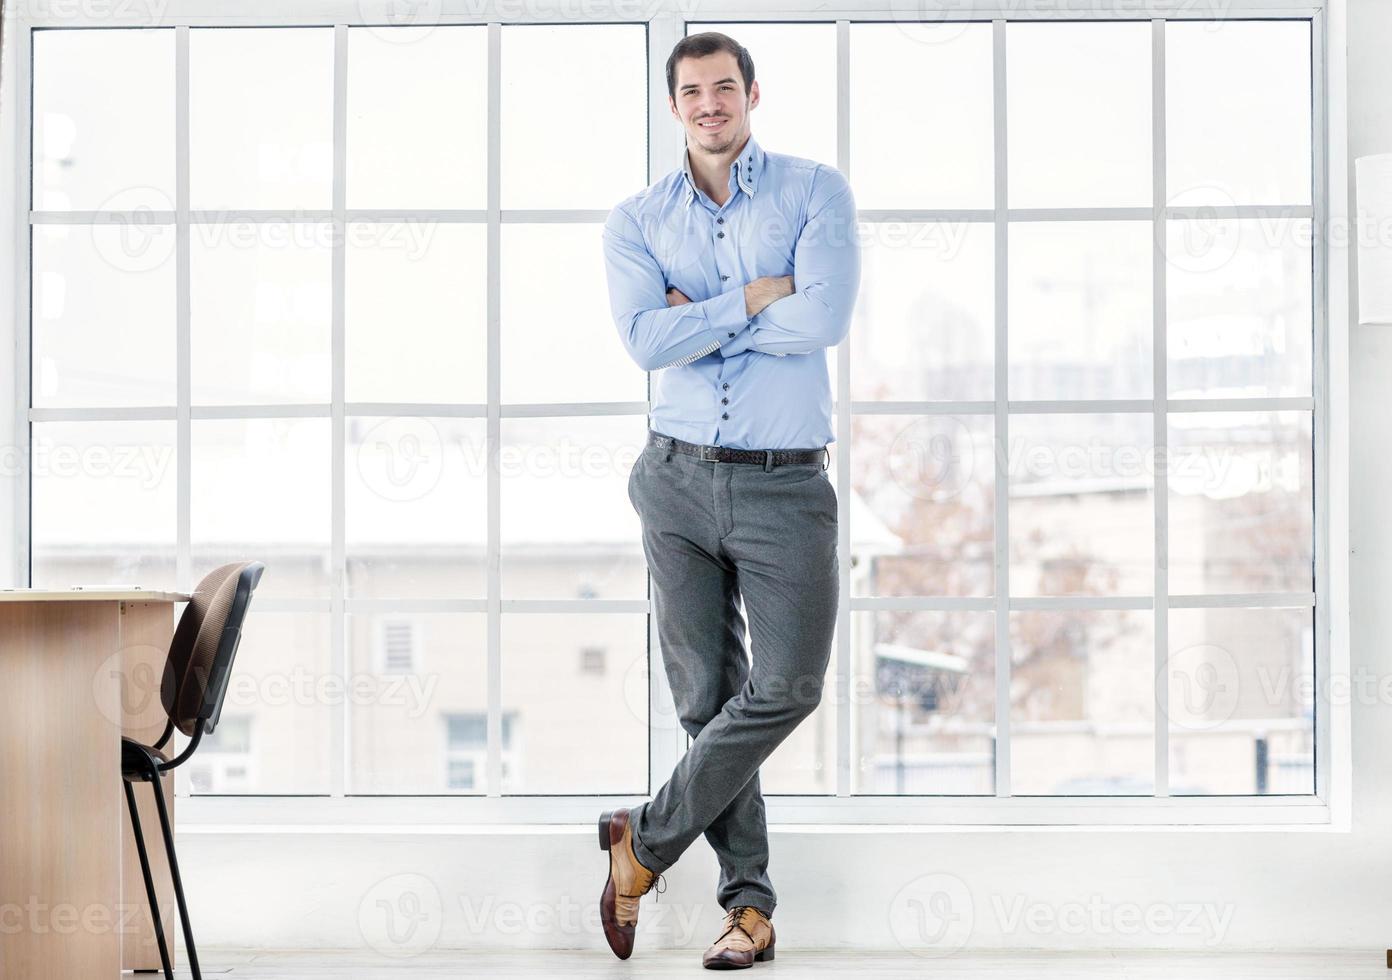 Confident businessman standing in office. Successful businessman photo